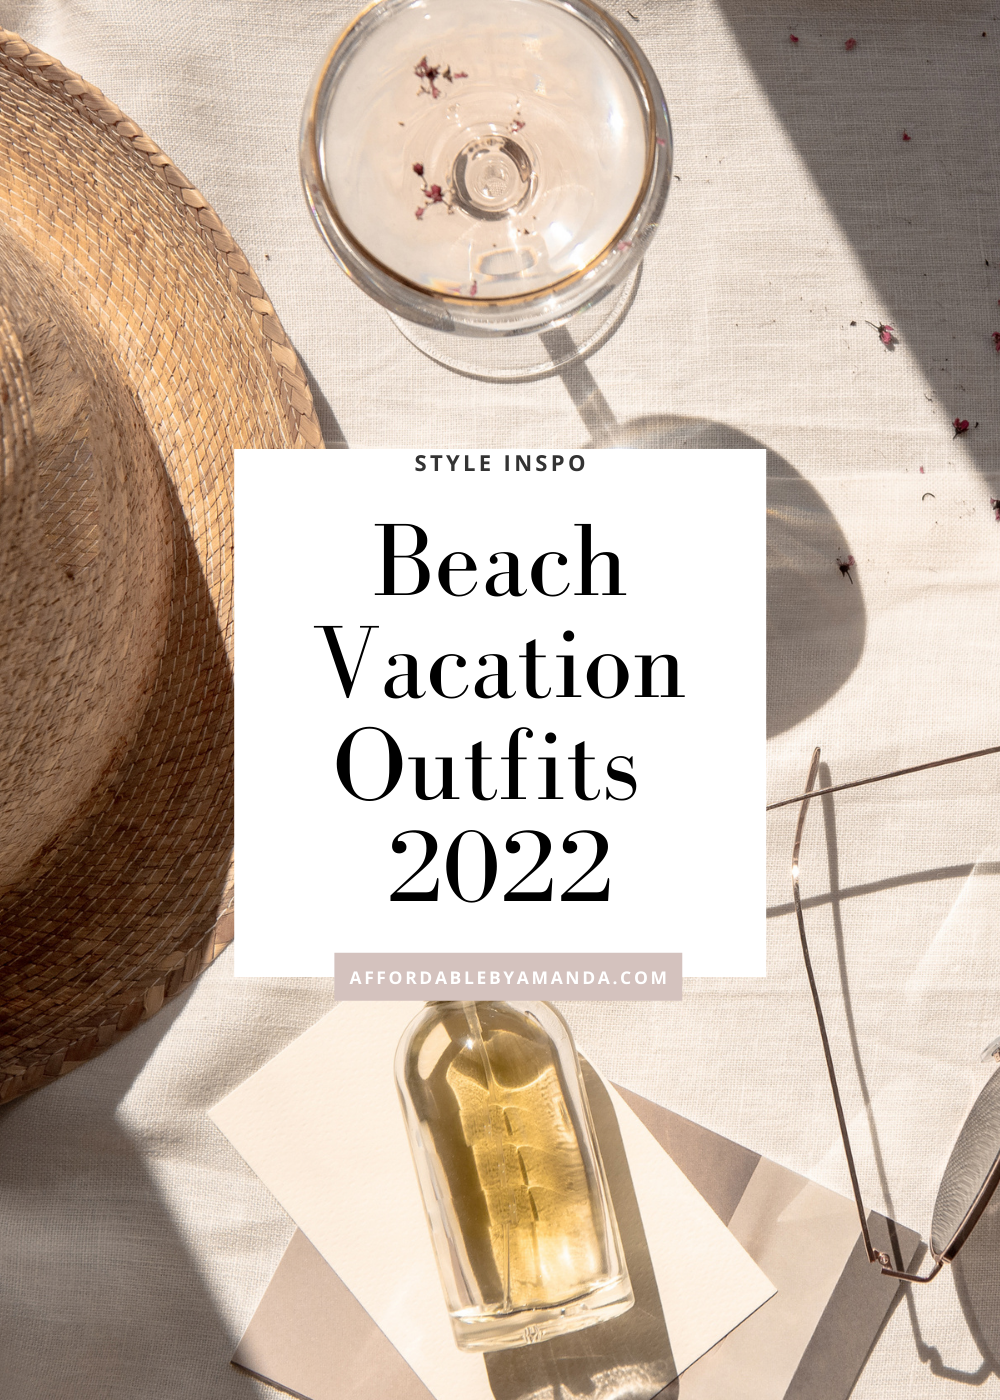 Cute Beach Vacation Outfits 2022 - What To Wear on a Florida Beach Vacation - Florida Vacation Outfits 2022